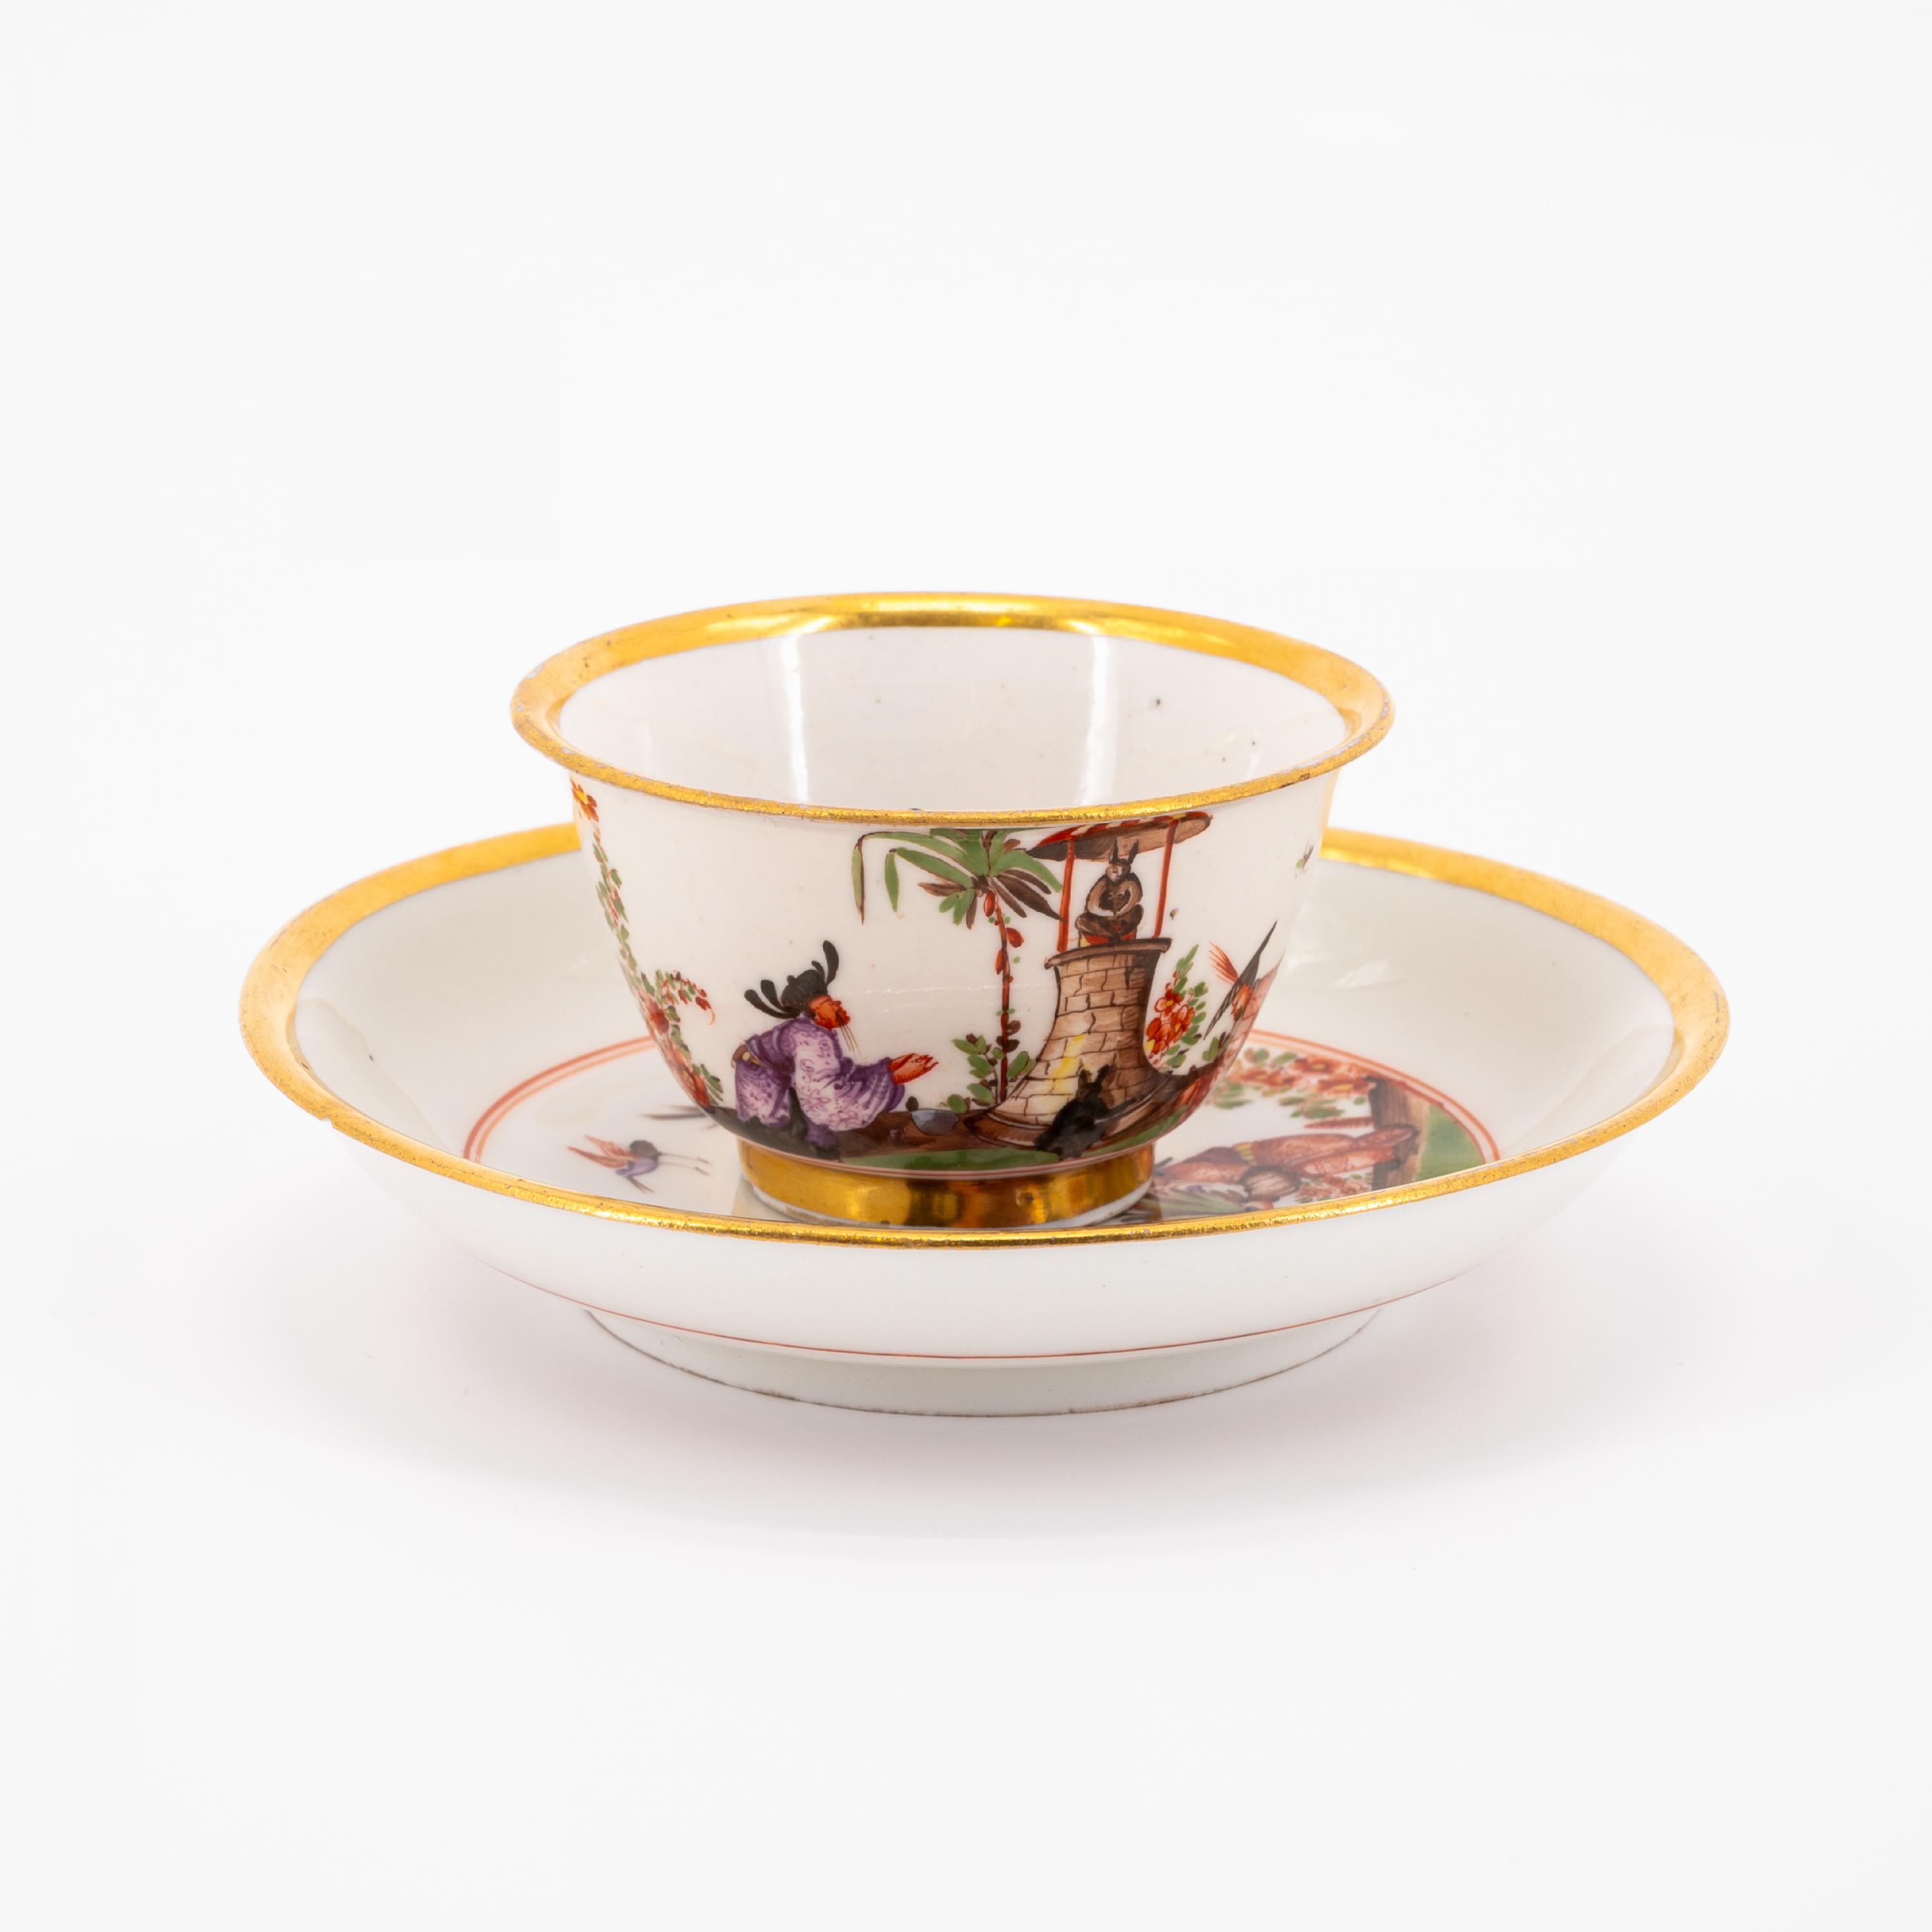 PORCELAIN TEA BOWLS AND SAUCER WITH FINE CHINOISERIES - Image 4 of 7